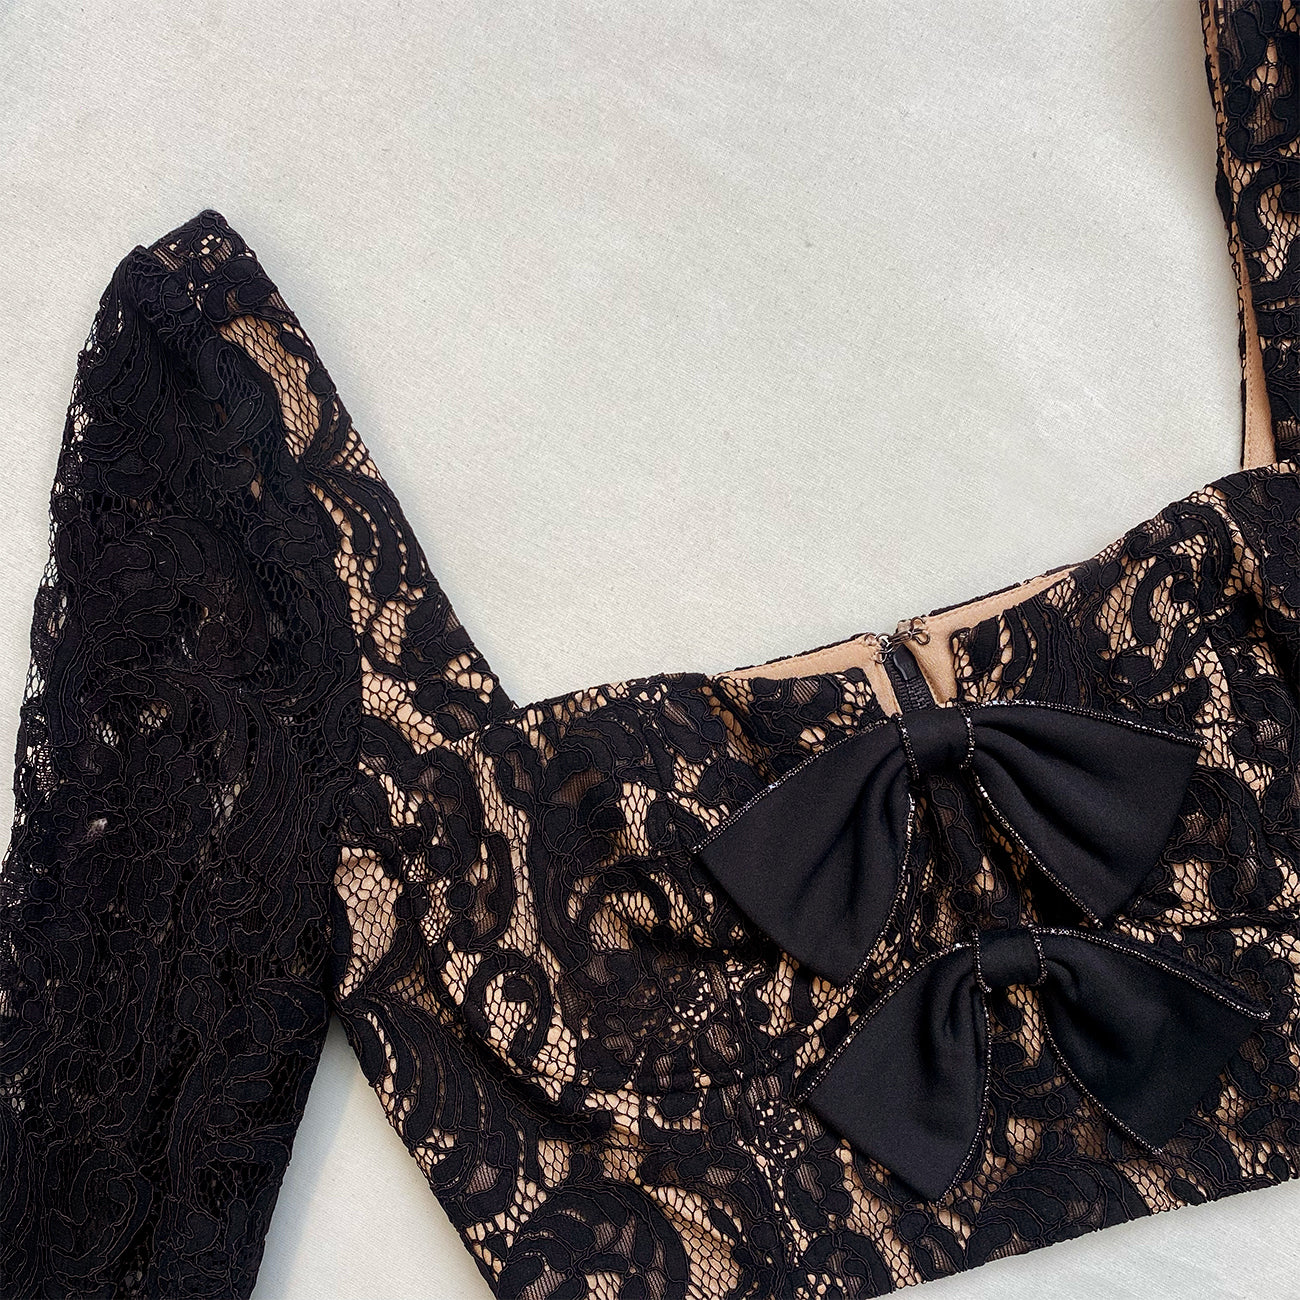 Black Cord Lace Top With Bows